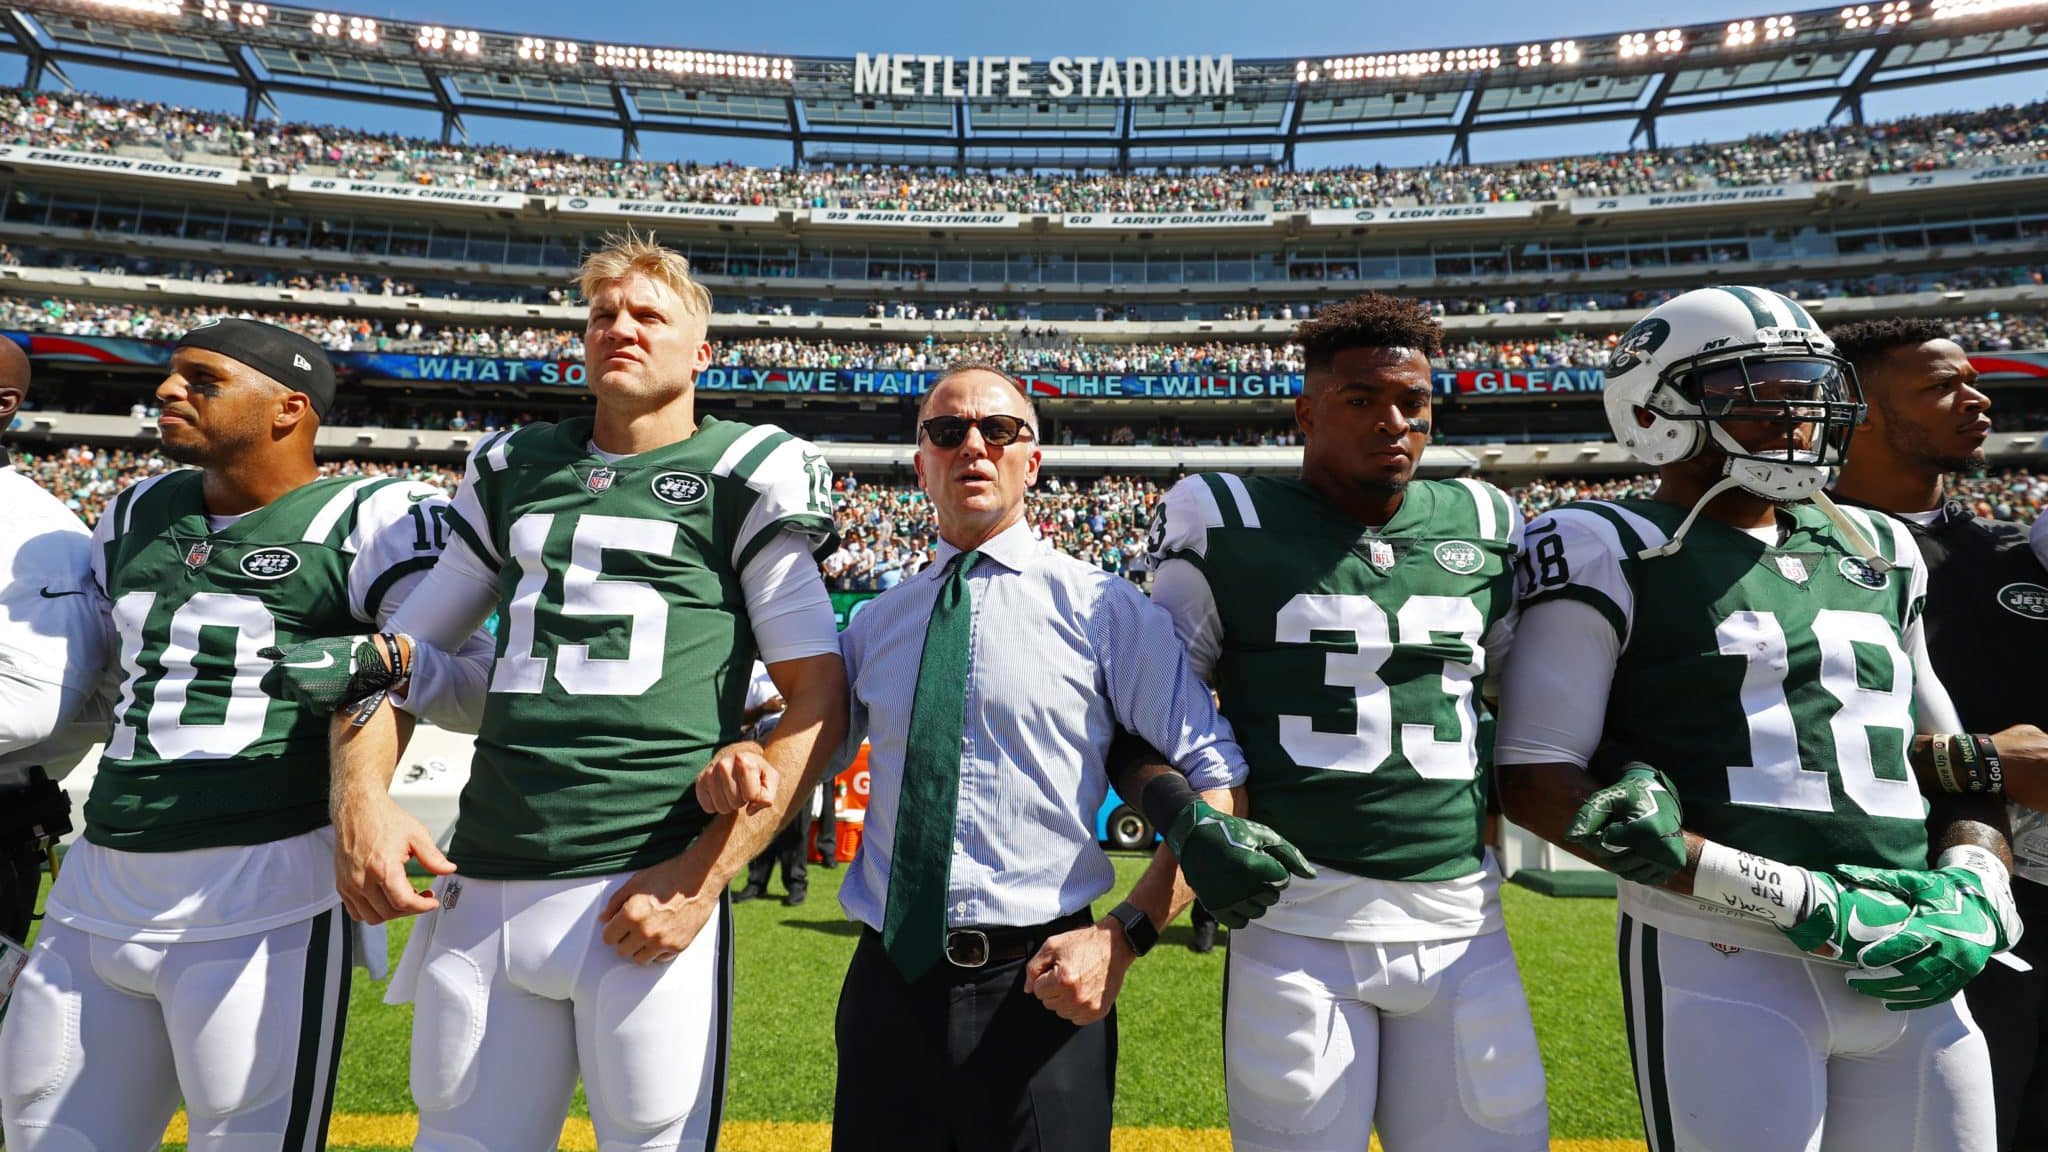 EAST RUTHERFORD, NJ - SEPTEMBER 24: Jermaine Kearse #10, Josh McCown #15, Jamal Adams #33, ArDarius Stewart #18 and Christopher Johnson CEO of the New York Jets stand in unison with his team during the National Anthem prior to an NFL game against the Miami Dolphins at MetLife Stadium on September 24, 2017 in East Rutherford, New Jersey.